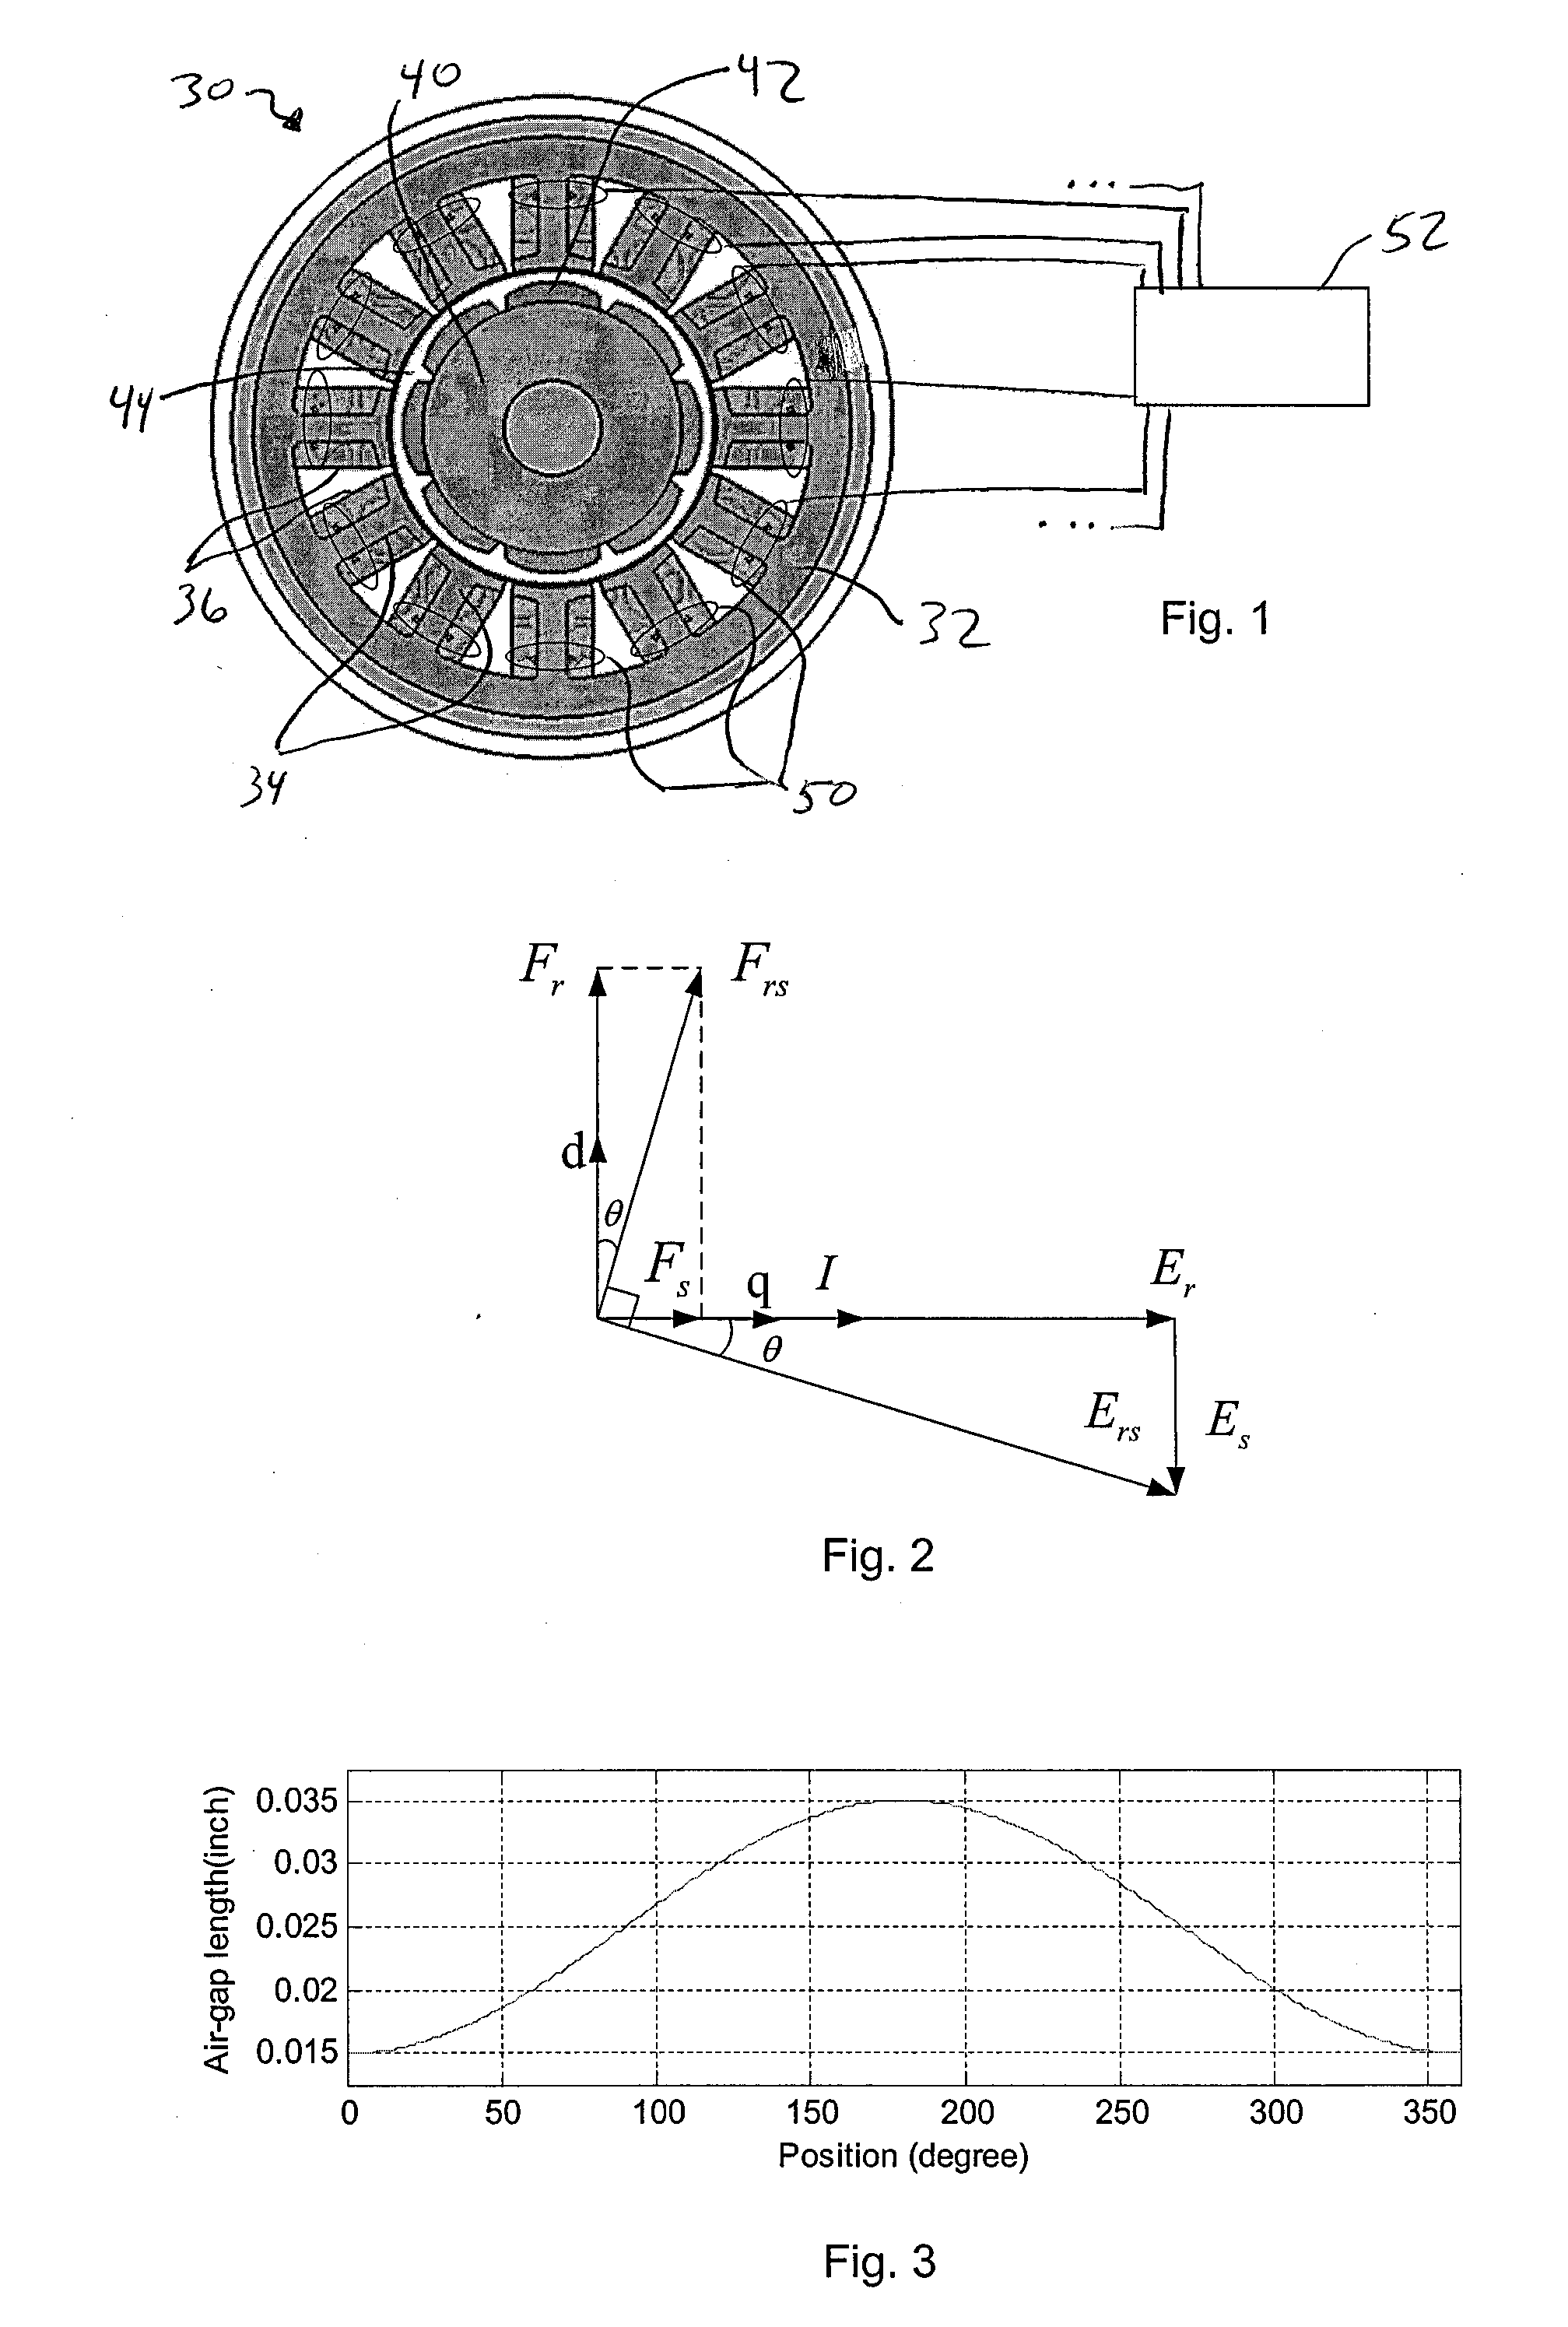 Apparatus and method for permanent magnet electric machine condition monitoring